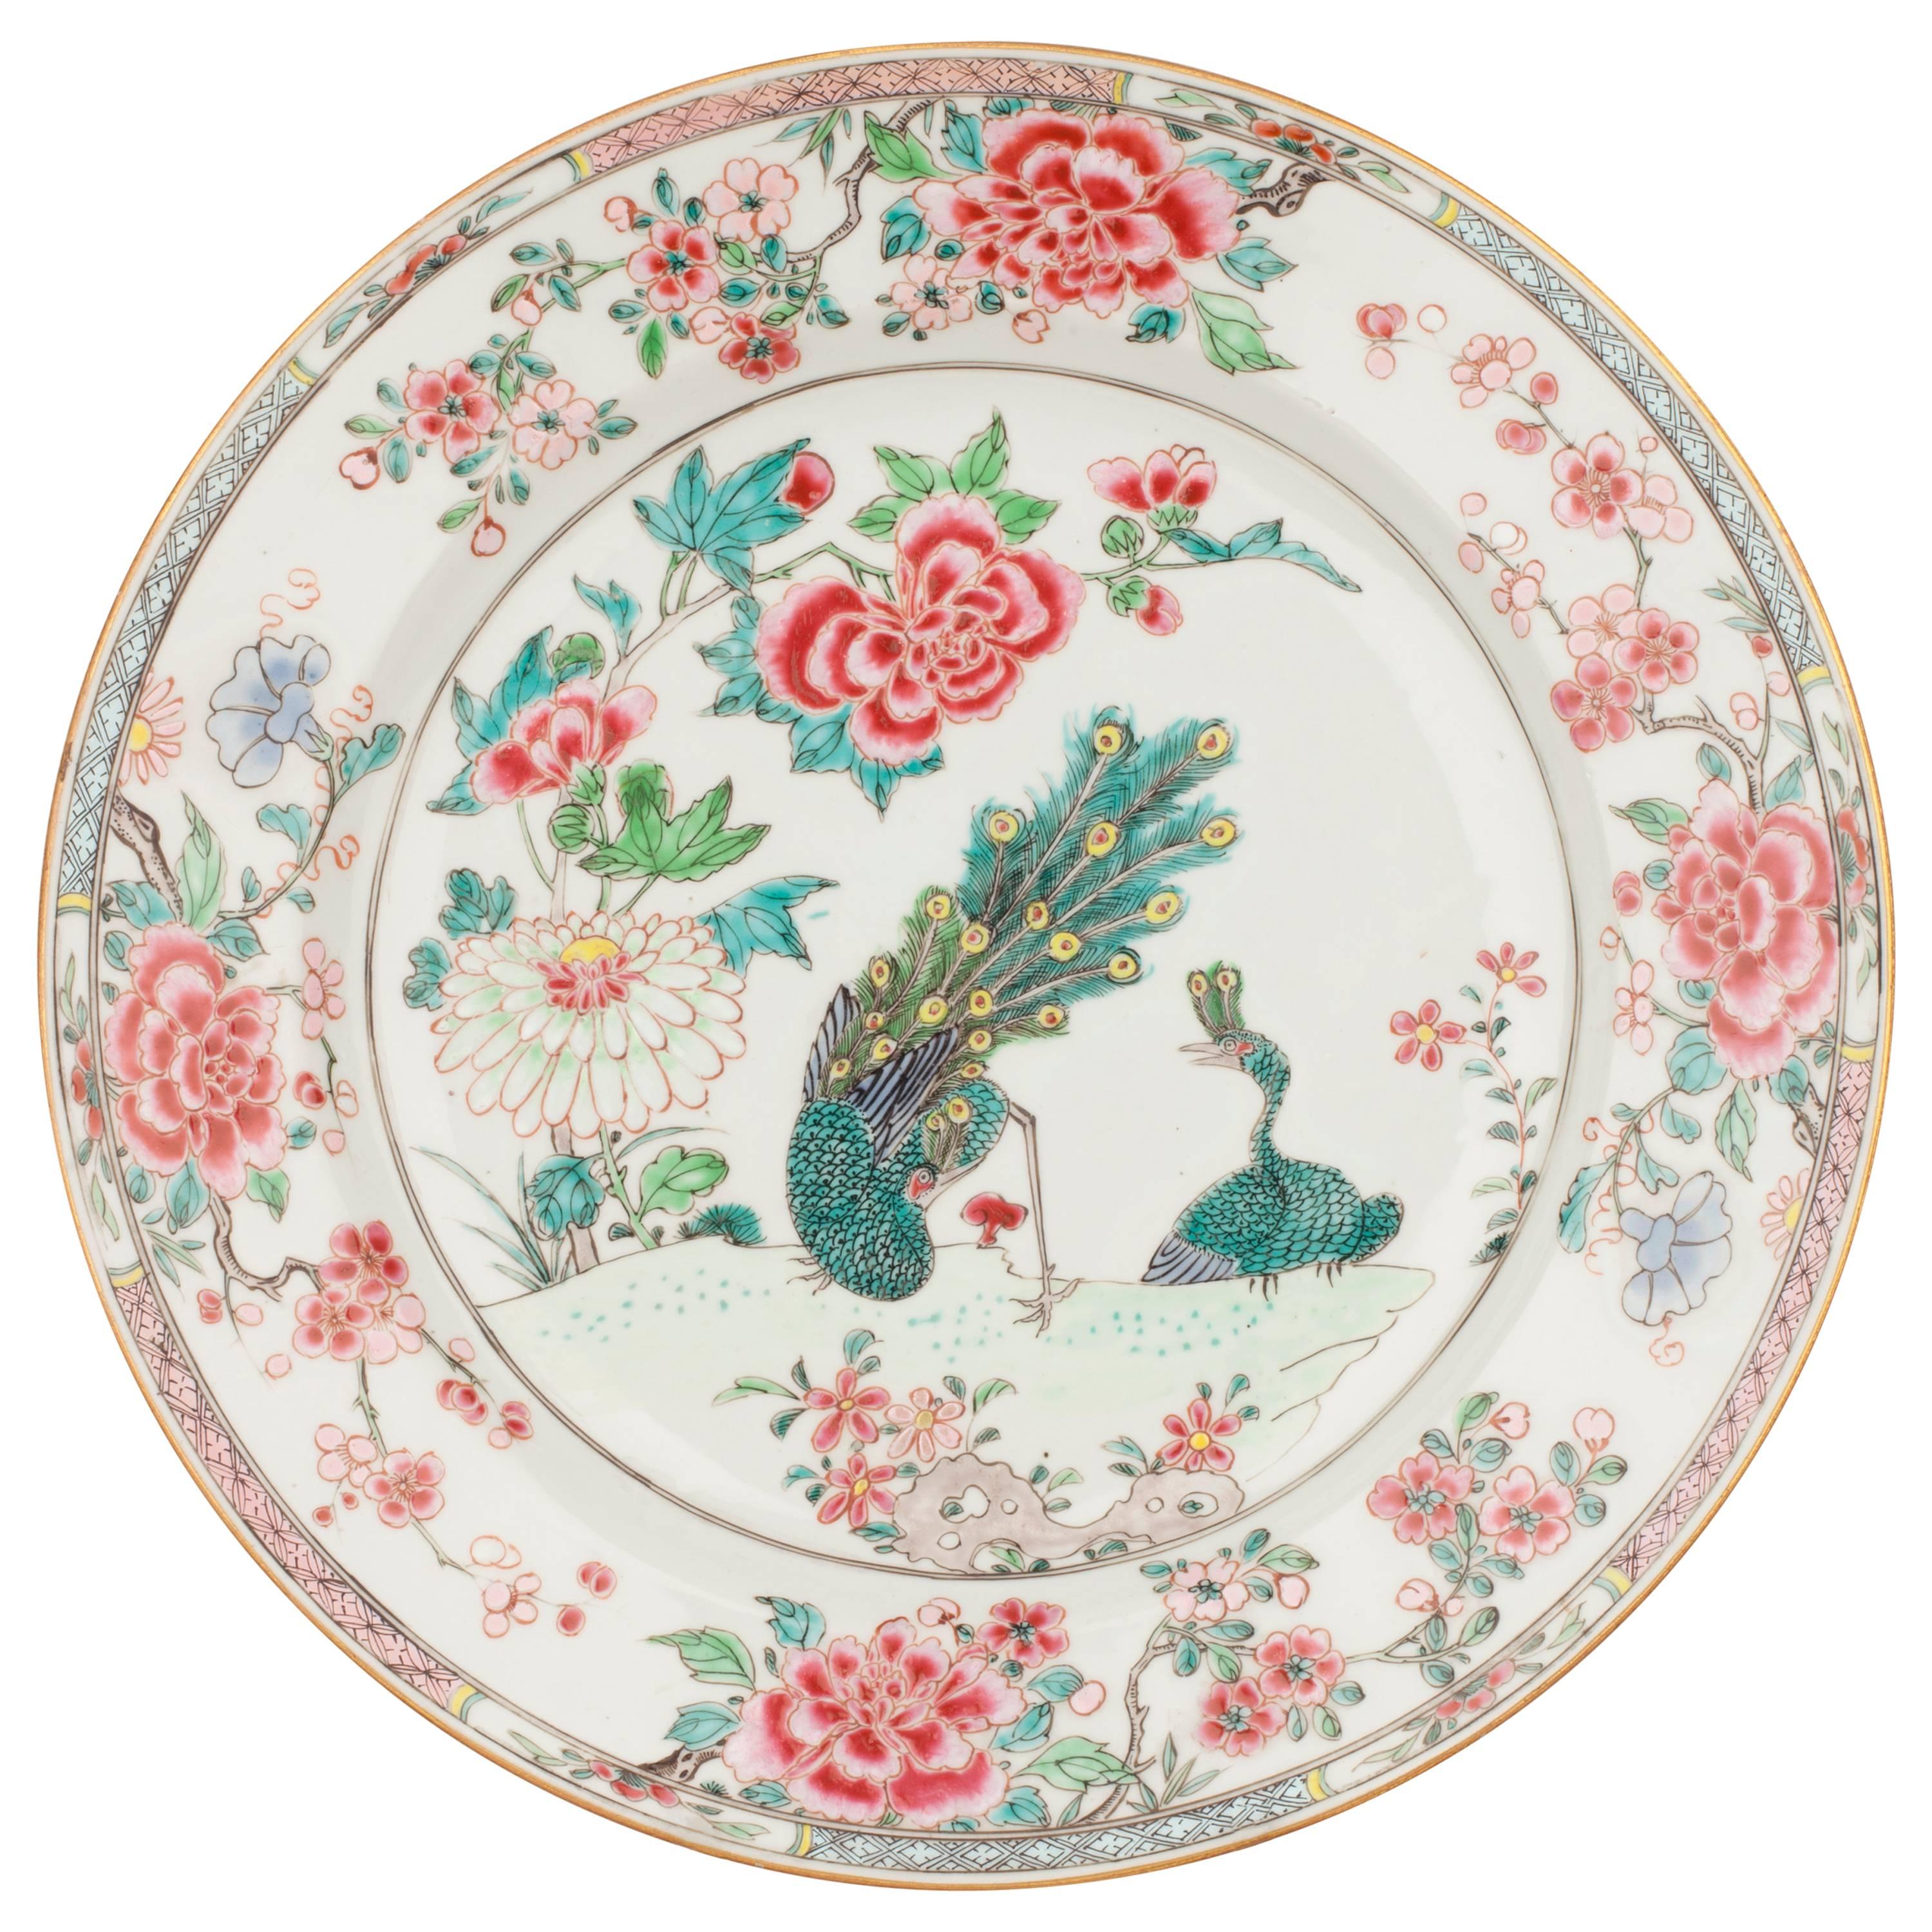 Chinese Porcelain Famille Rose Peacock Dish, 18th Century